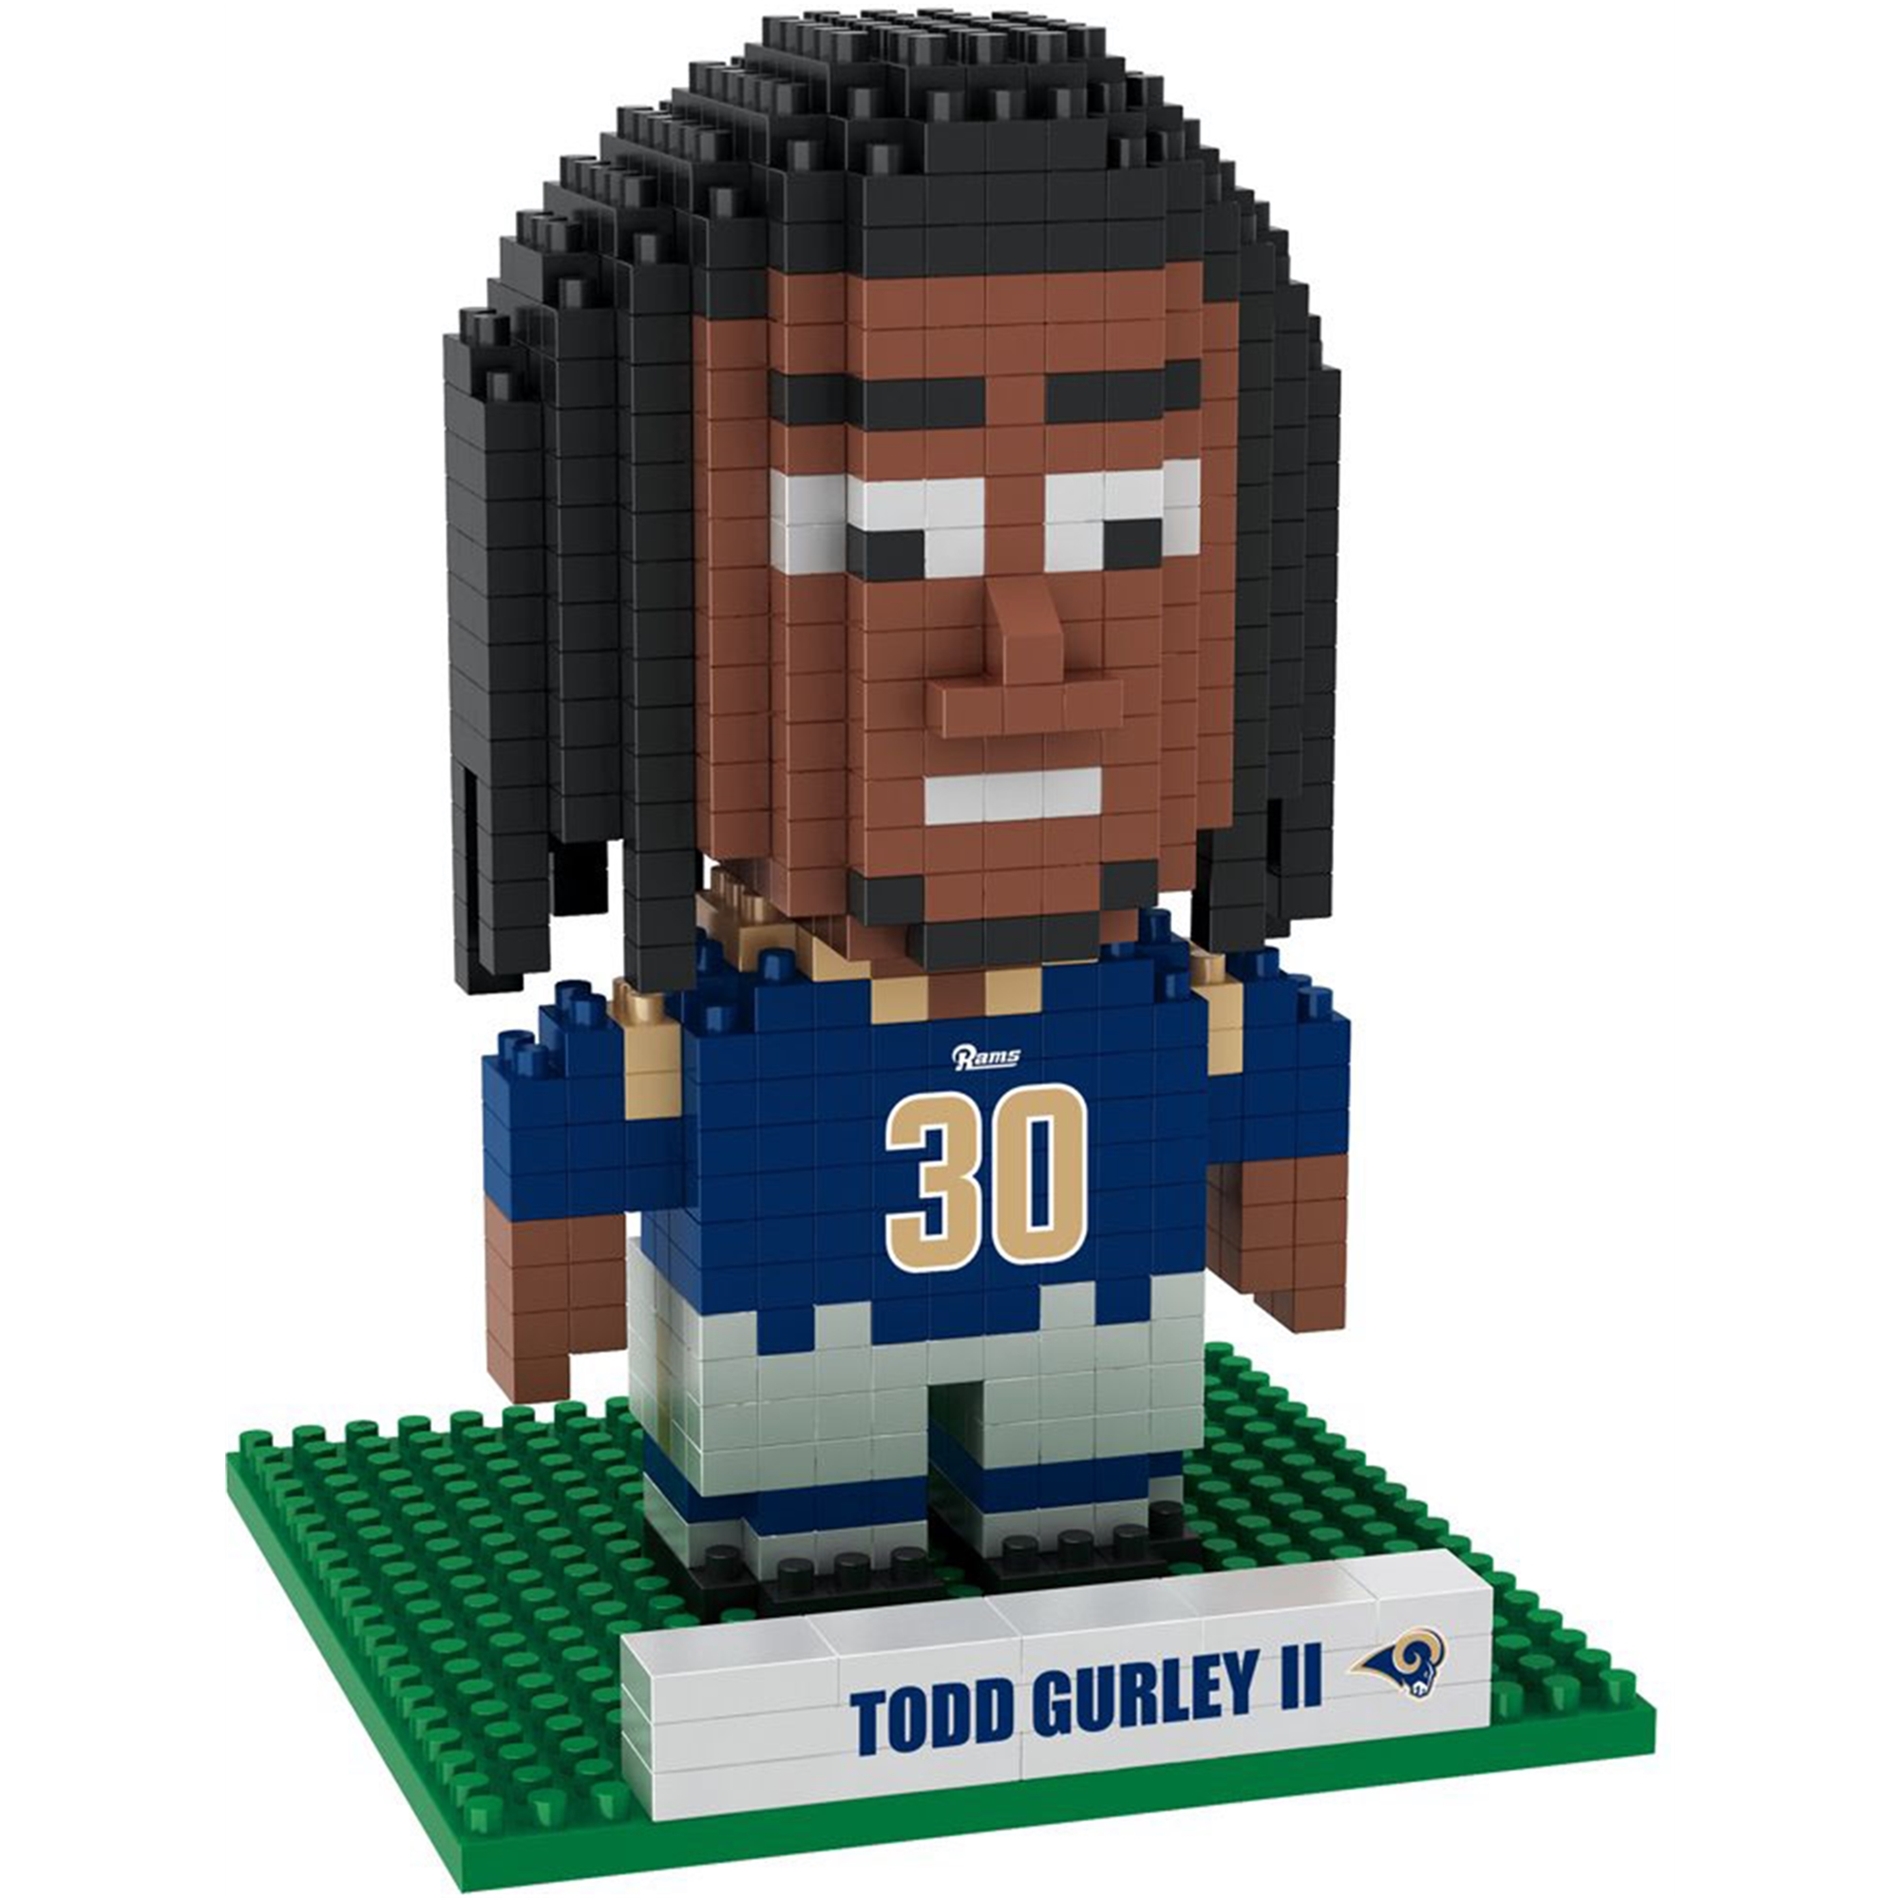 Forever Collectibles Unisex Todd Gurley II Construction Toy Souvenir multicolor